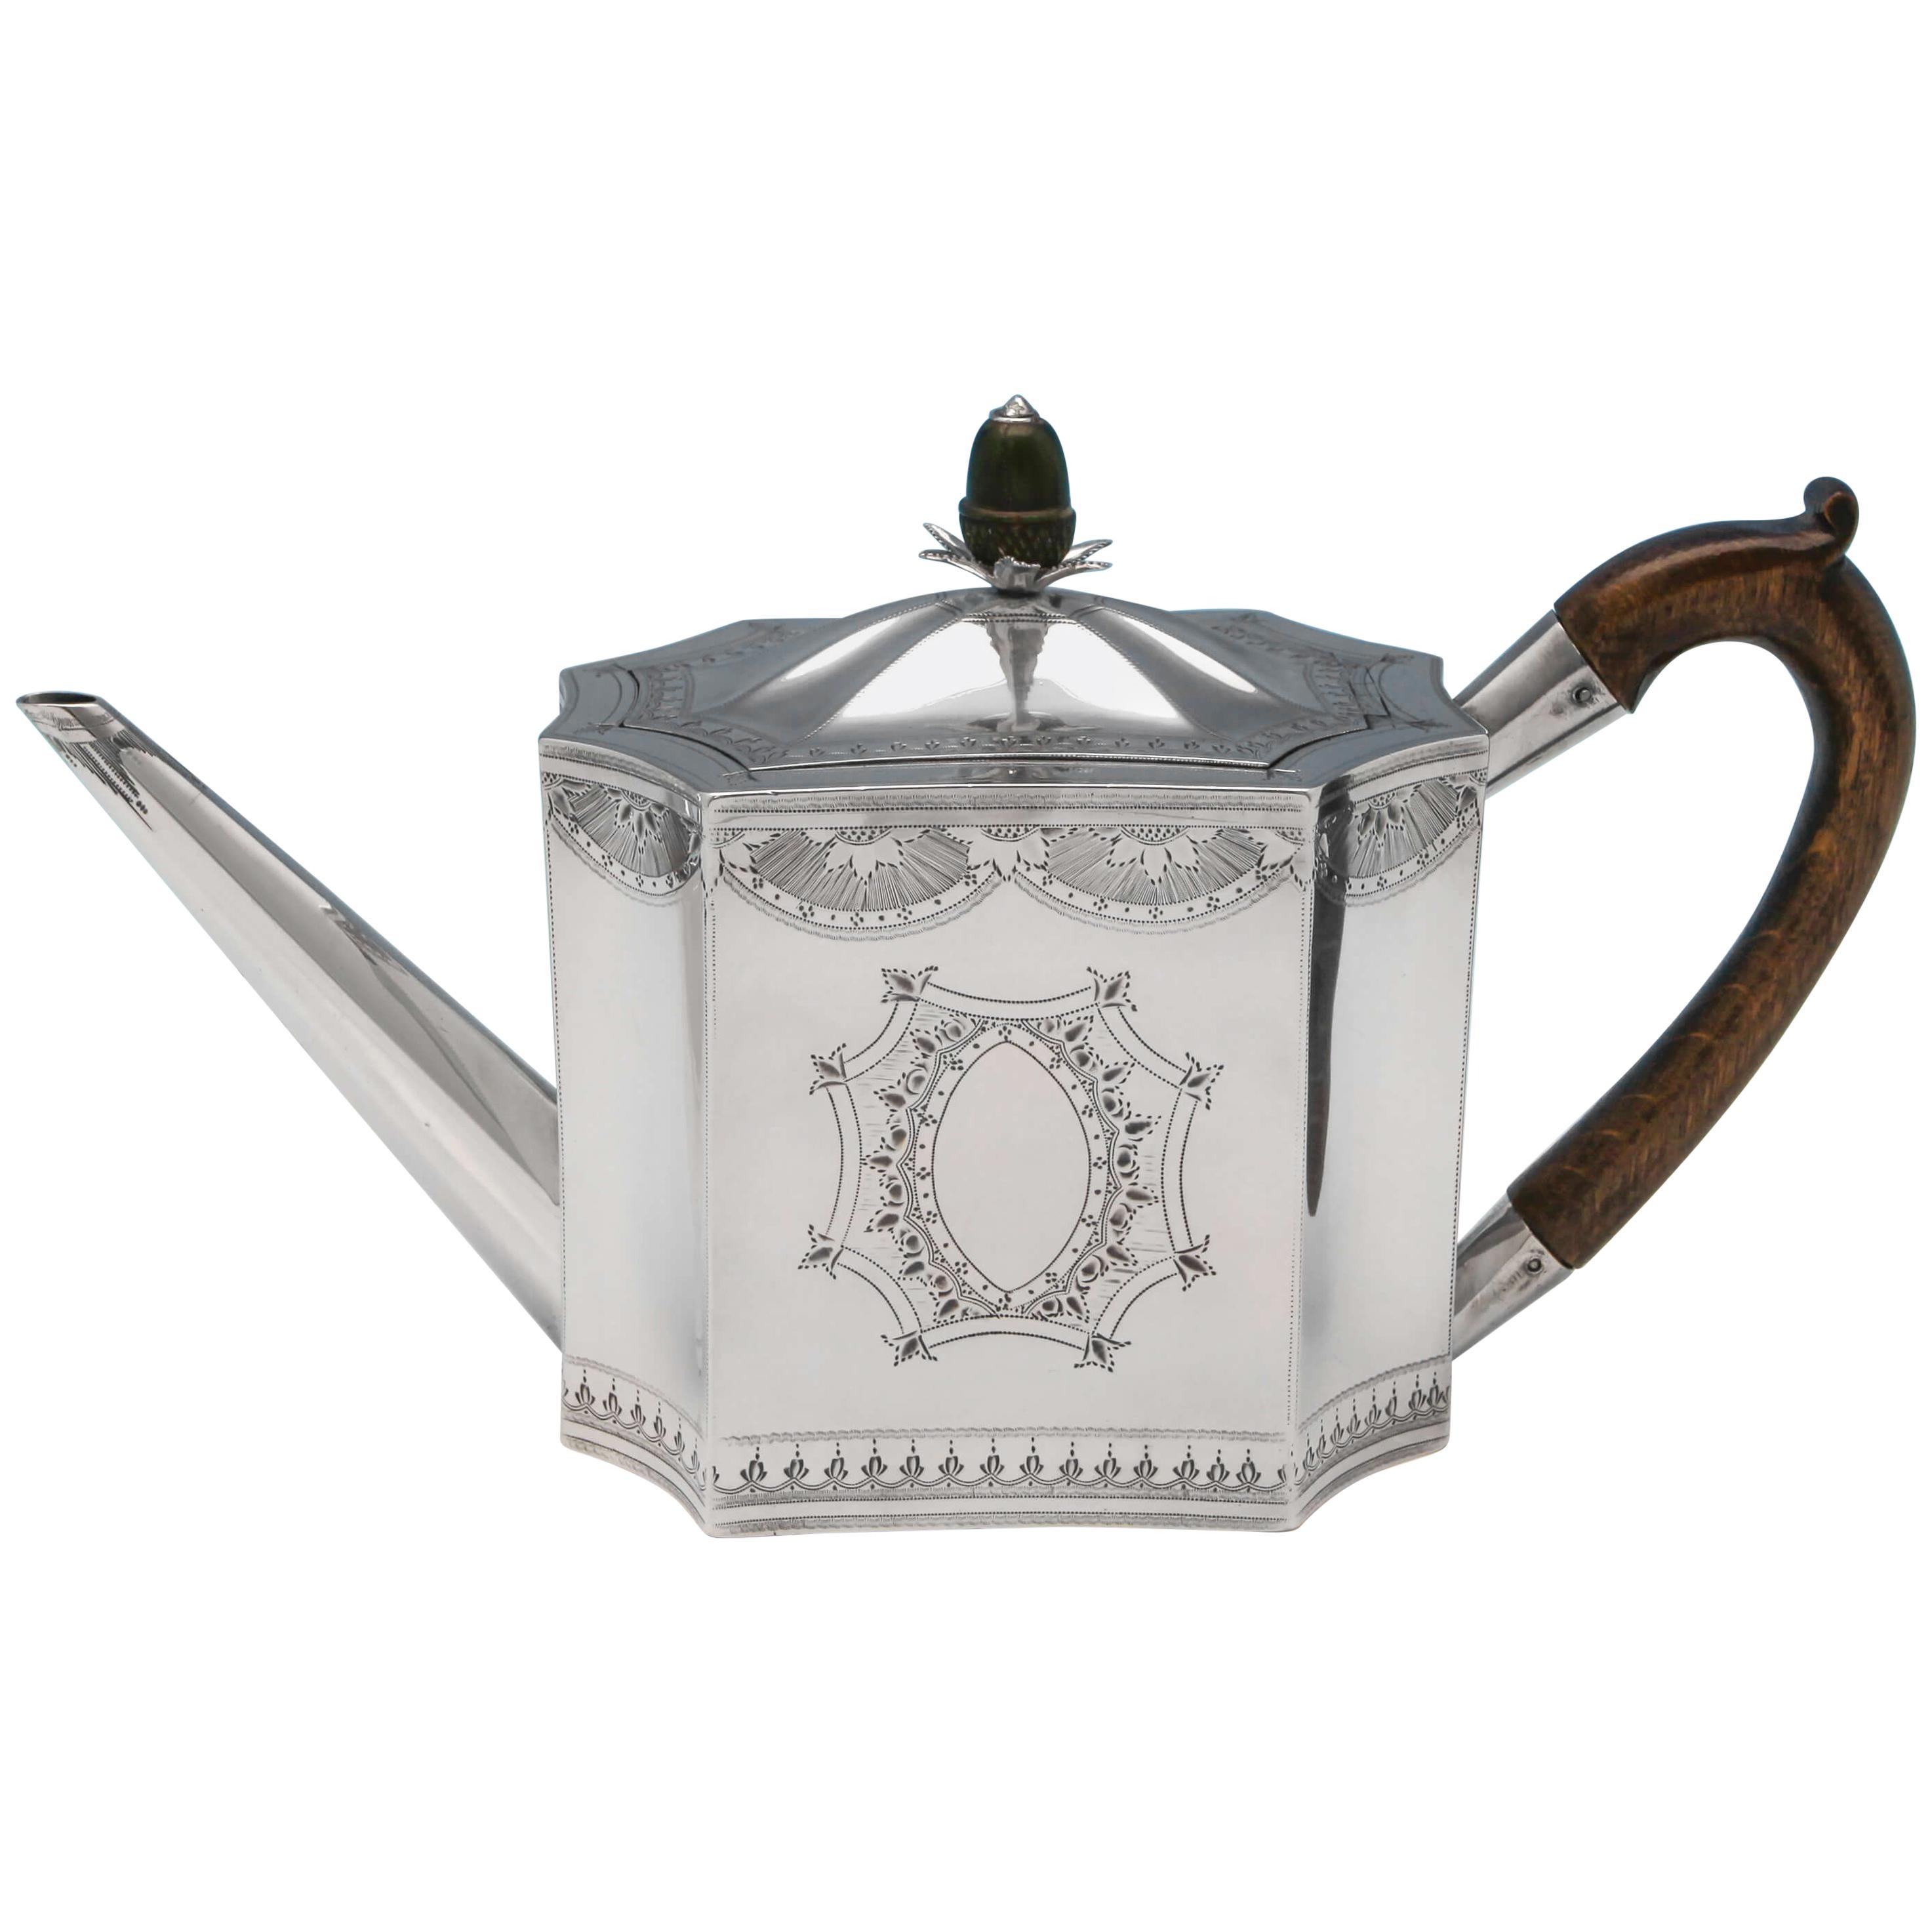 Neoclassical Period George III Antique Sterling Silver Teapot Made in 1790